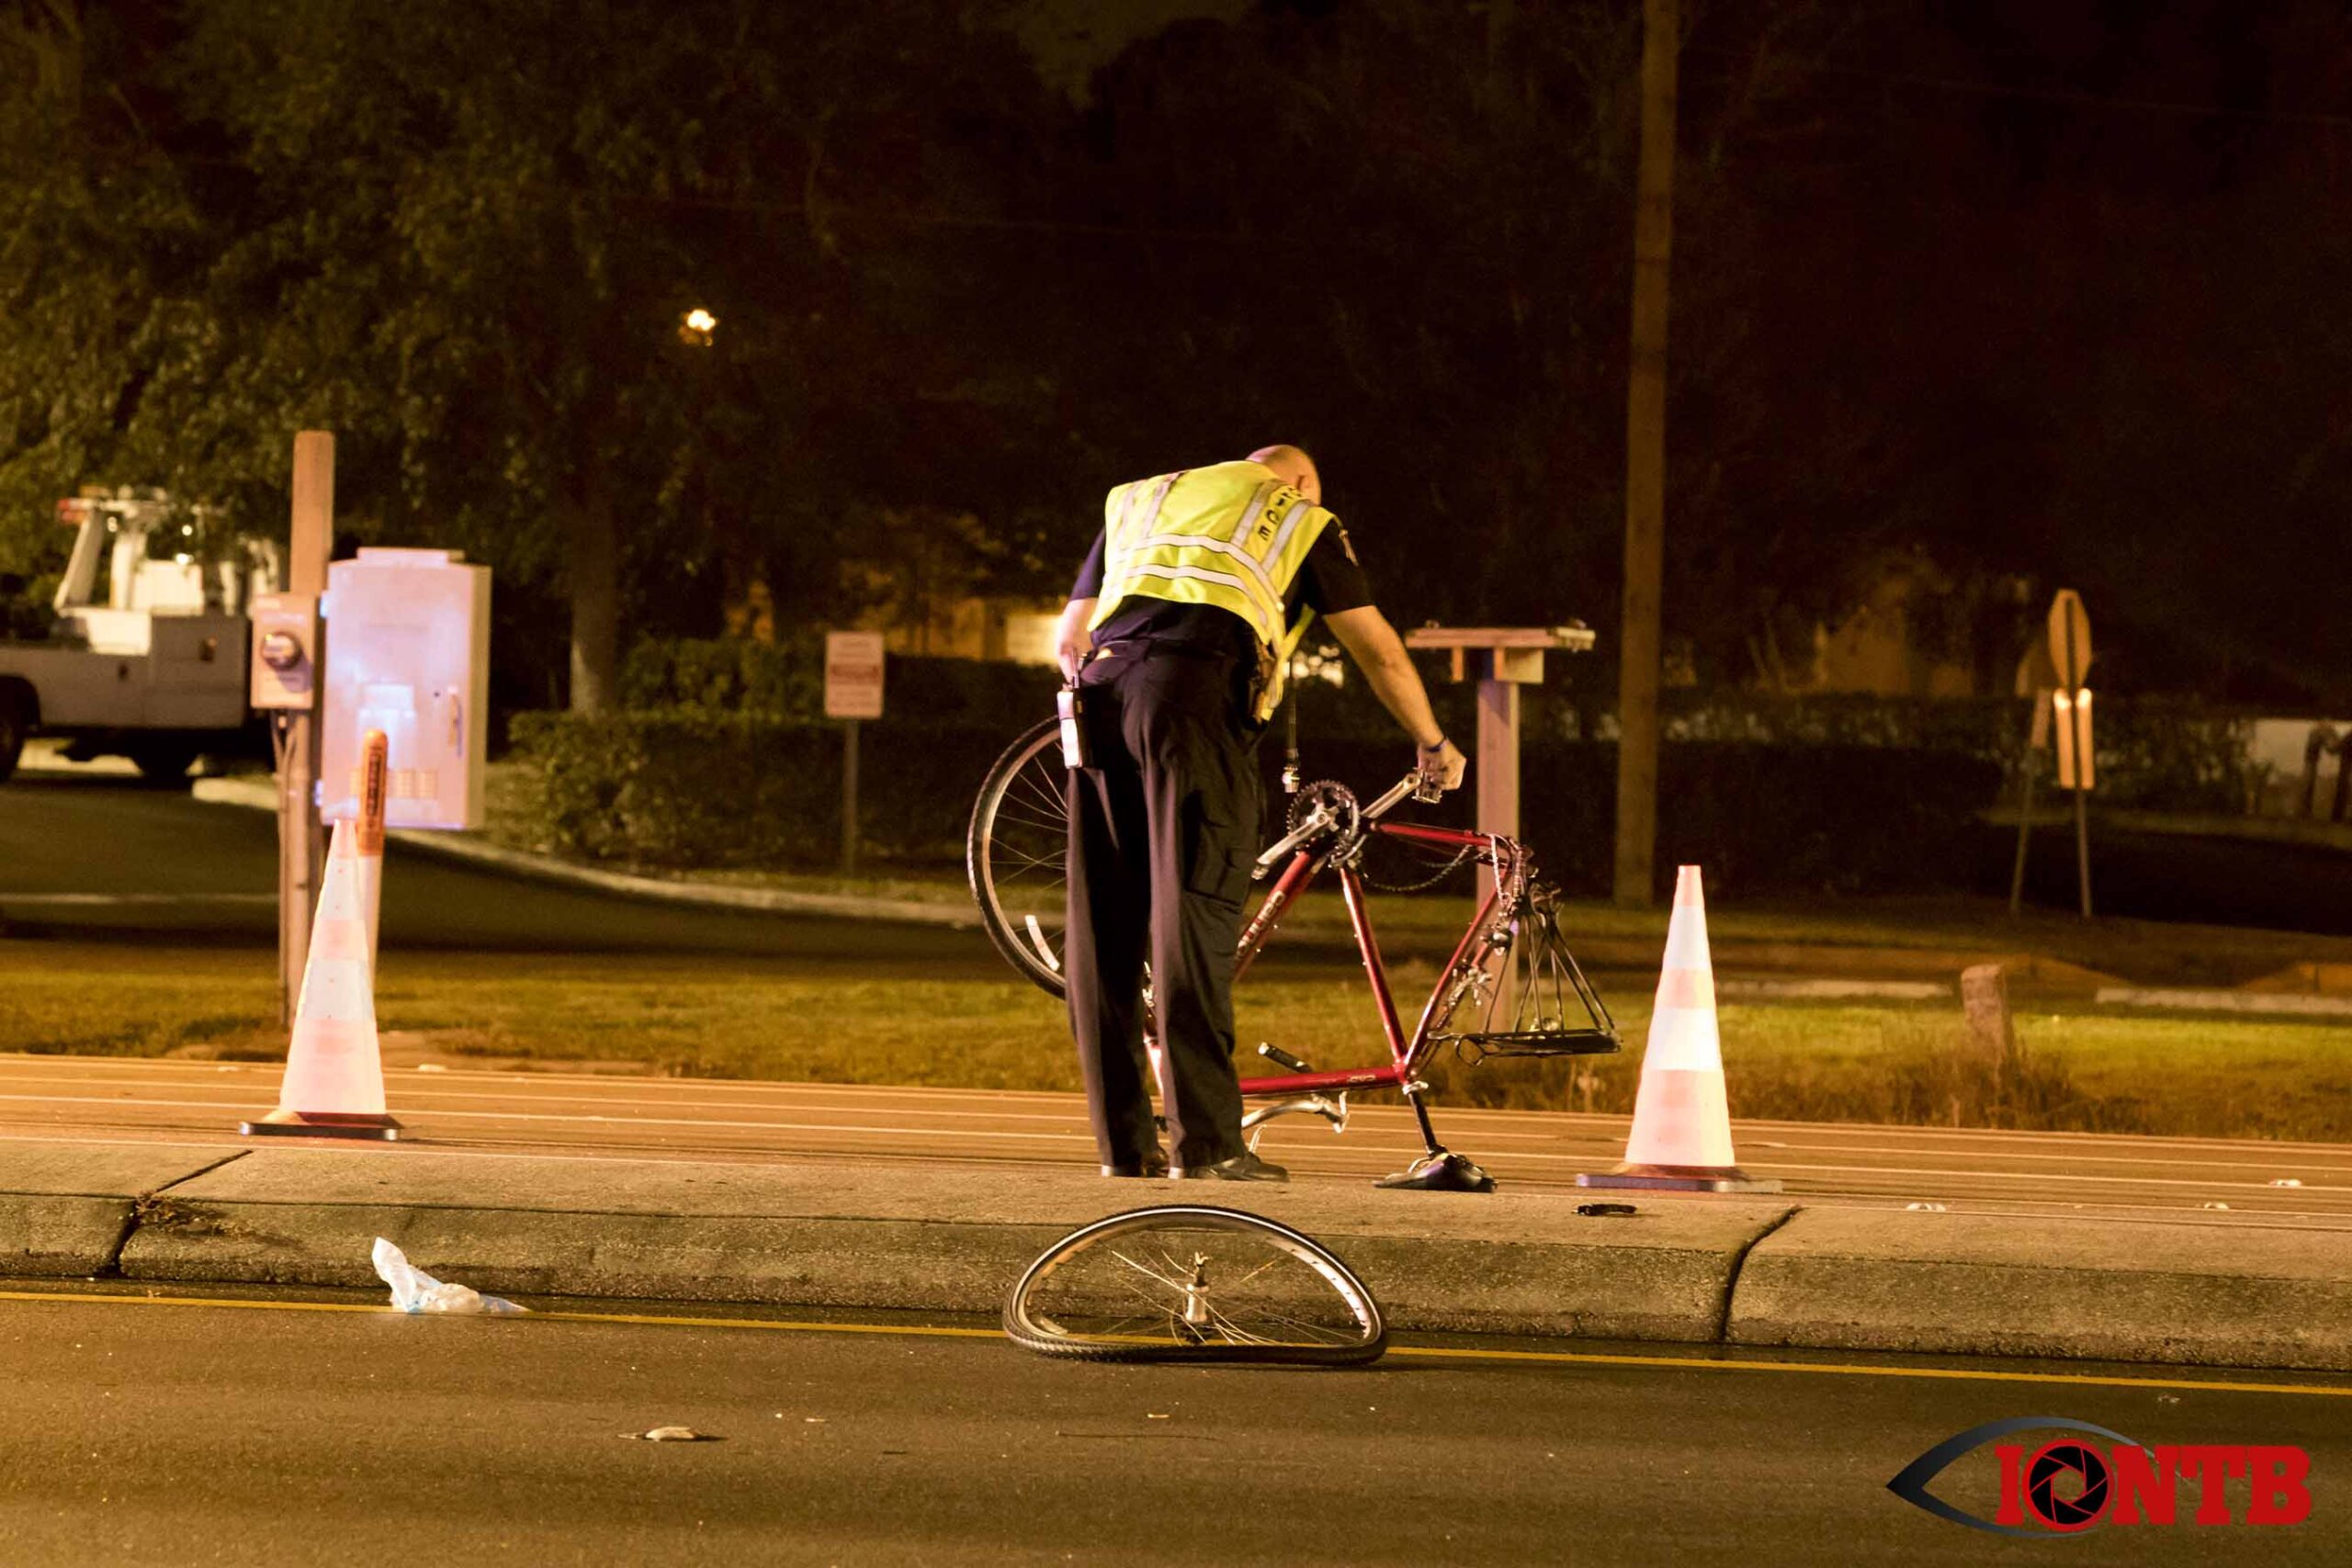 Bicyclist Struck and Killed in Front of the Pinellas Park Walmart - IONTB